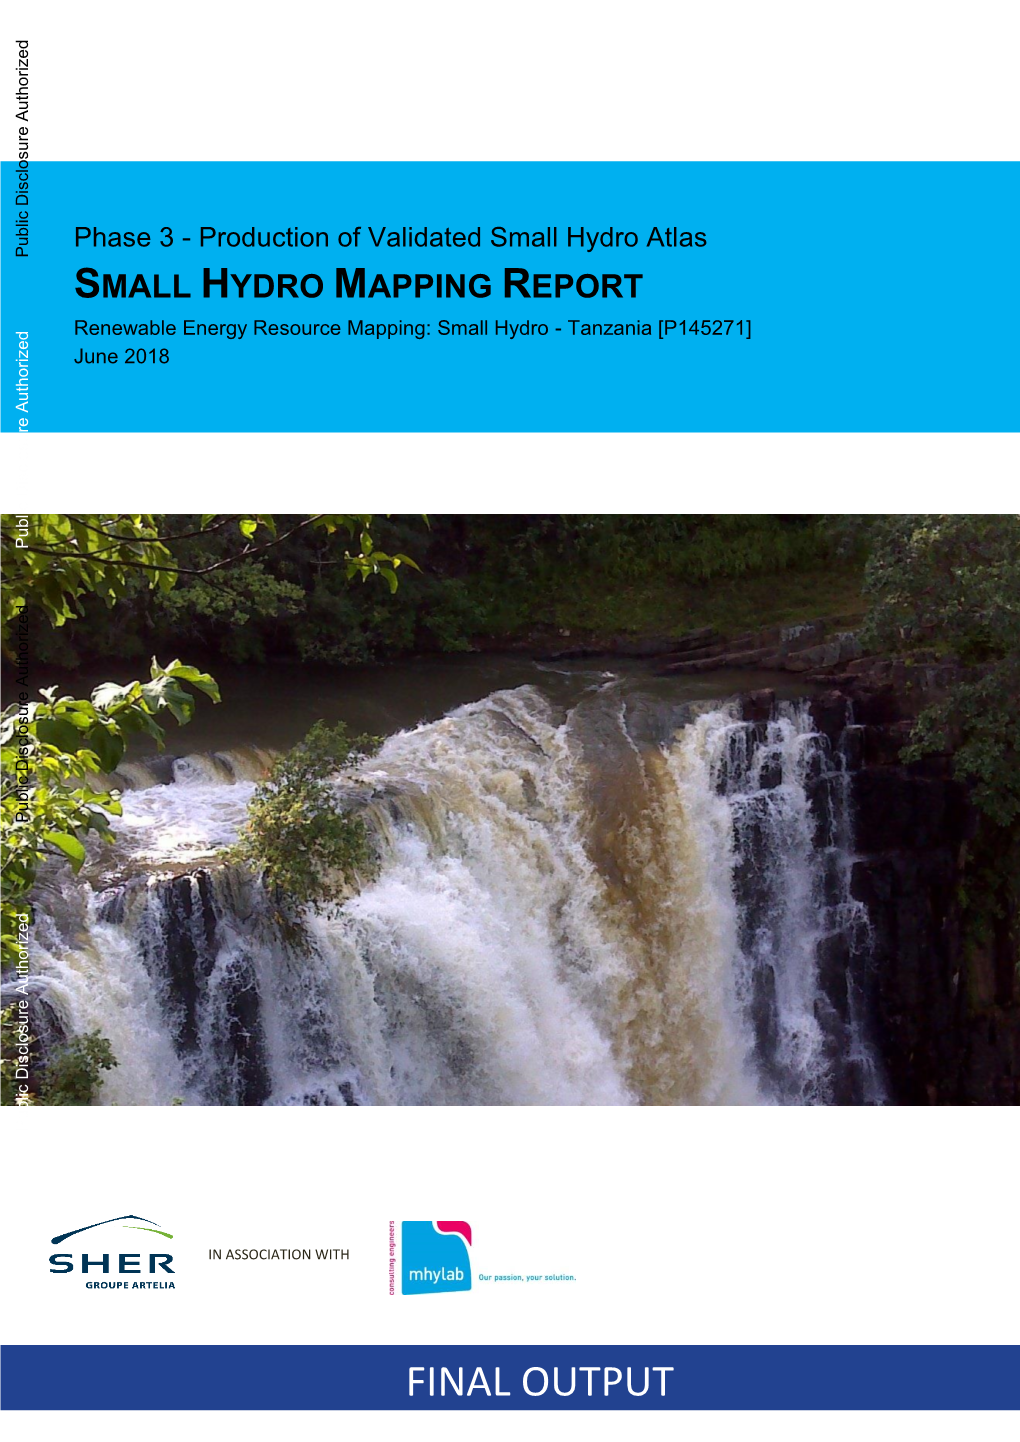 SMALL HYDRO MAPPING REPORT Renewable Energy Resource Mapping: Small Hydro - Tanzania [P145271] June 2018